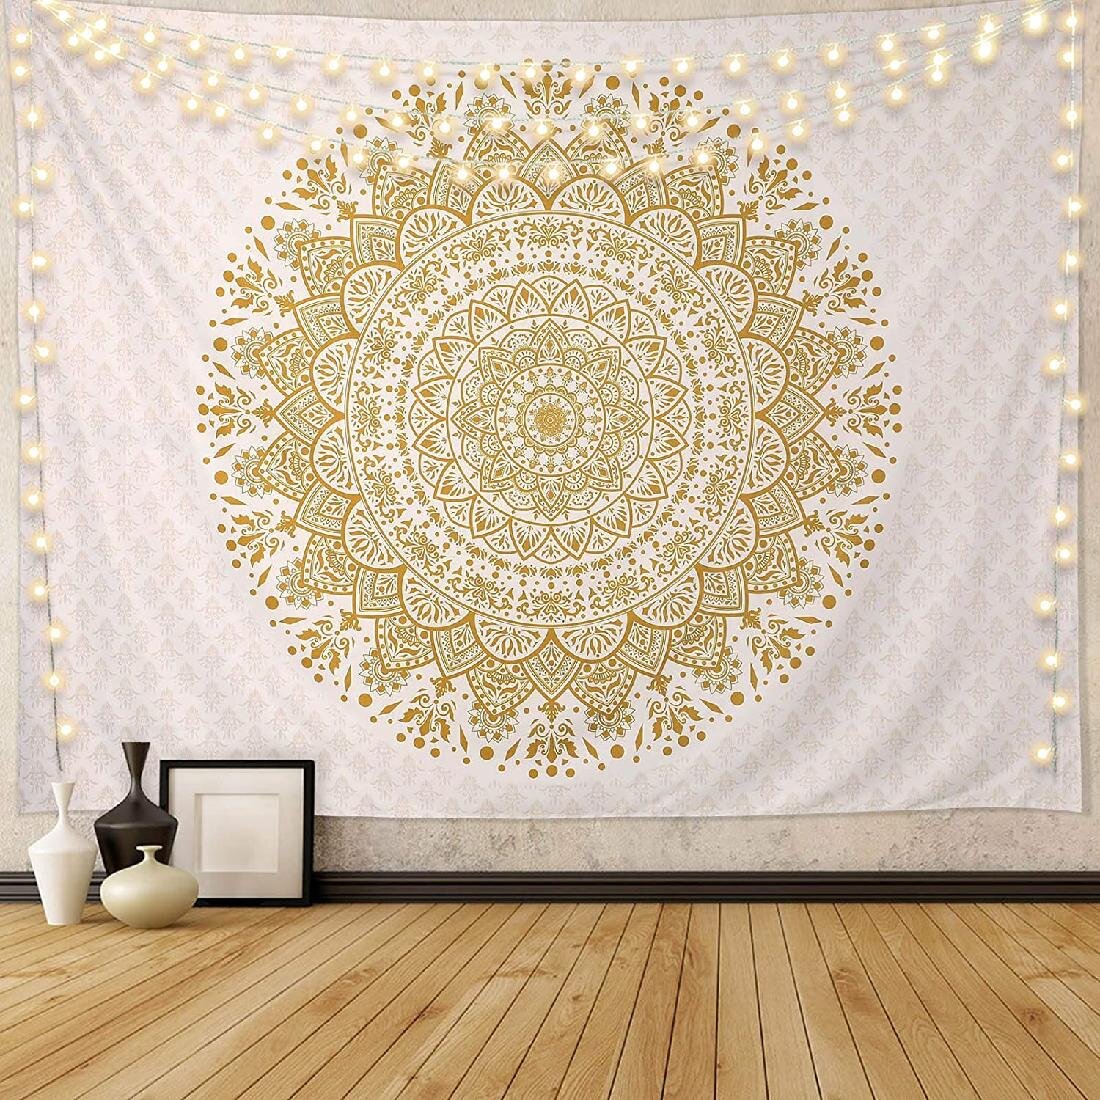 Indian Mandala Tapestry Wall Hanging Polyester Blanket Home Bedroom Decoration 